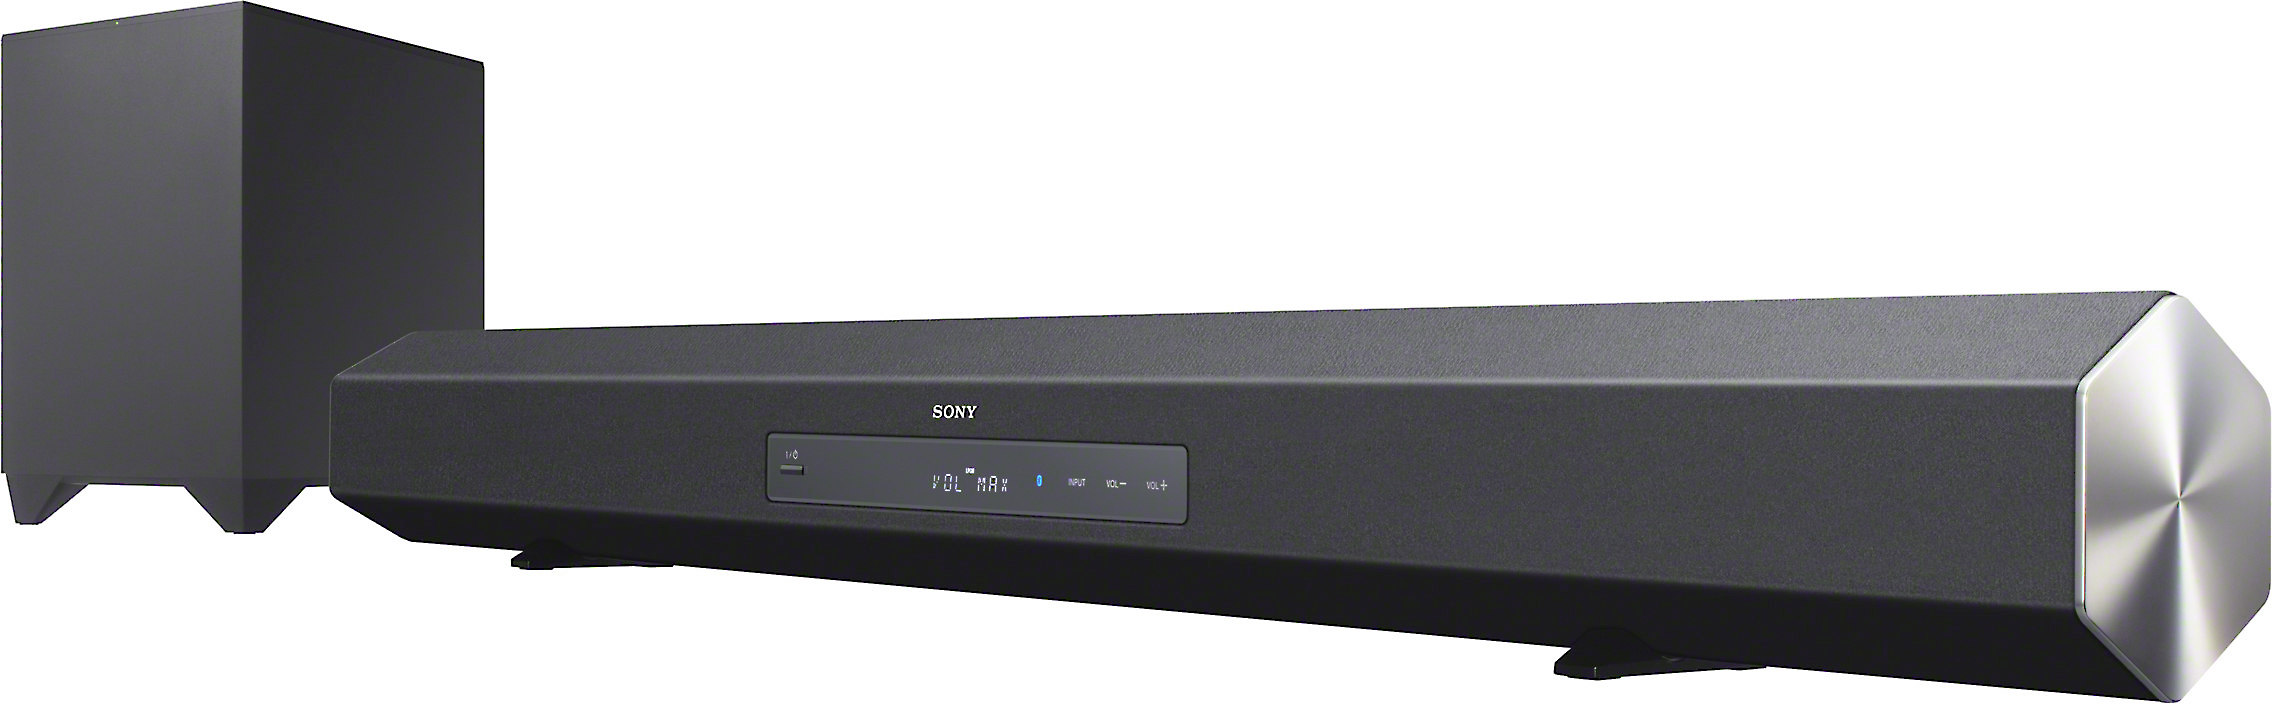 Sony HT-CT260 Powered 2.1-channel home theater sound bar with wireless